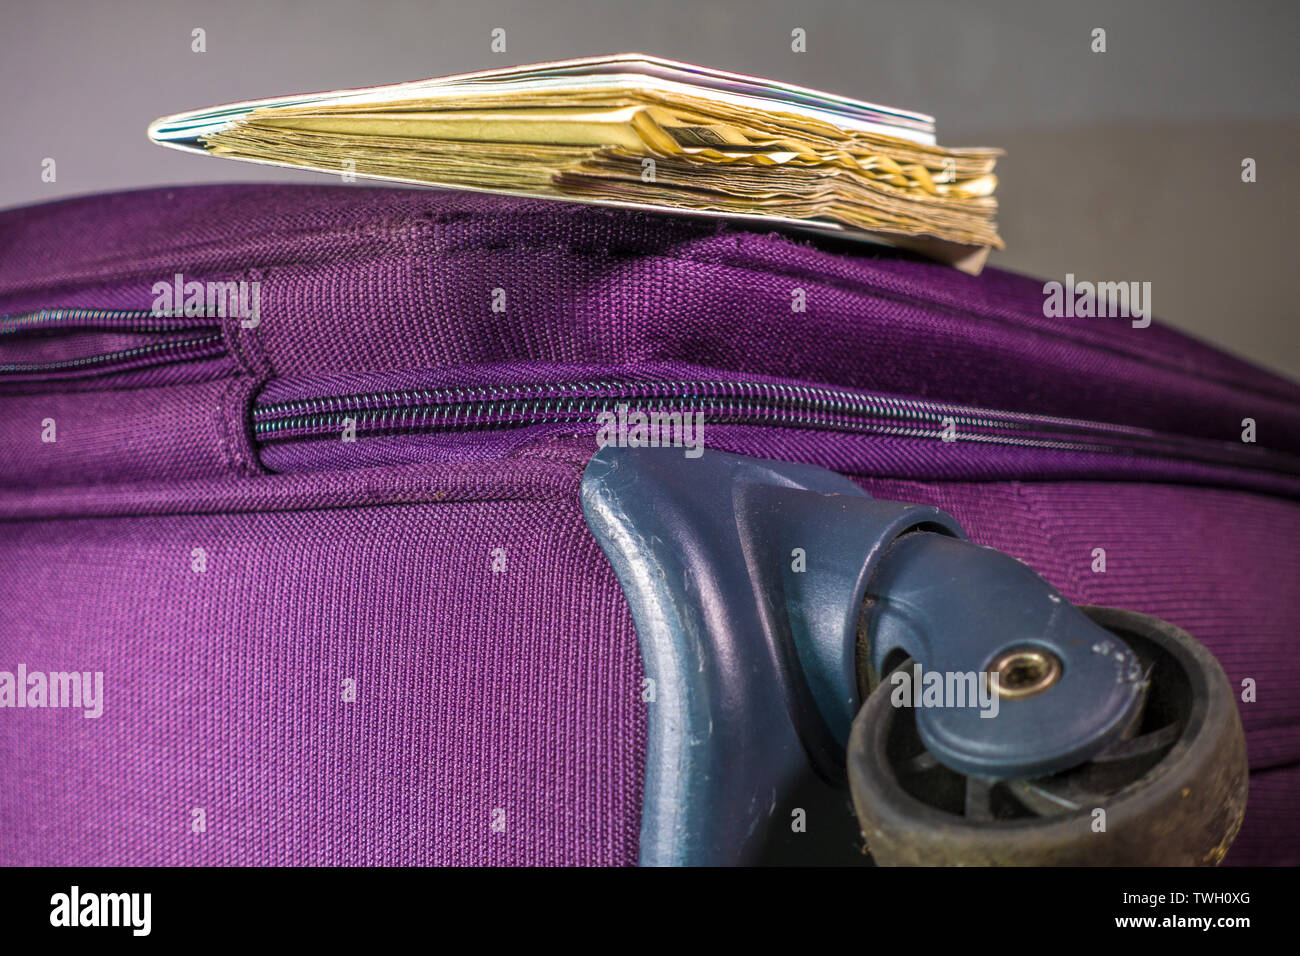 on a wooden board bag full of money Stock Photo - Alamy